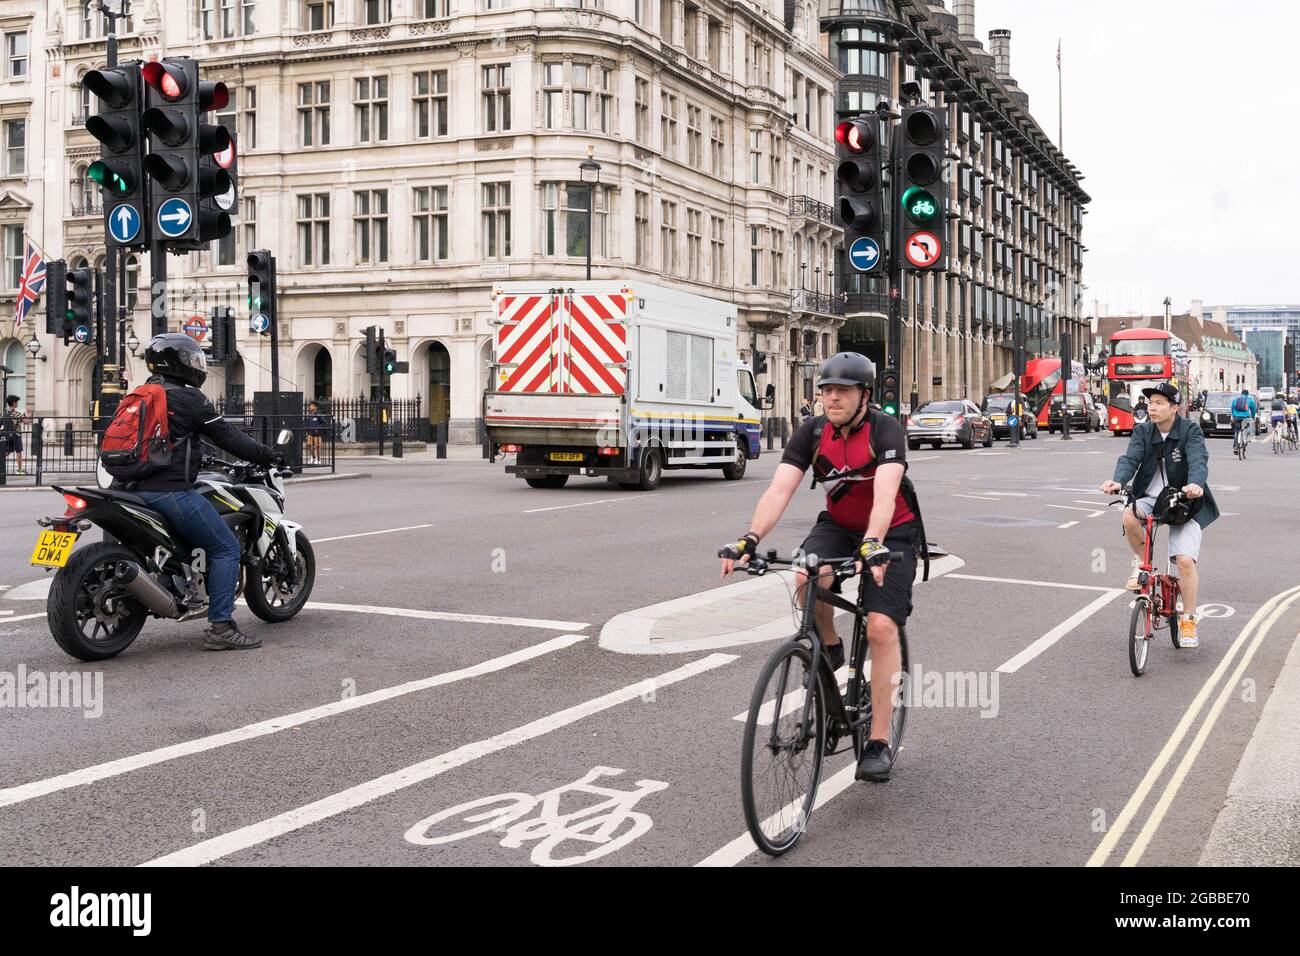 cyclist on cycle lane during evening traffic co -exists with car traffic City of Westminster London England UK Stock Photo